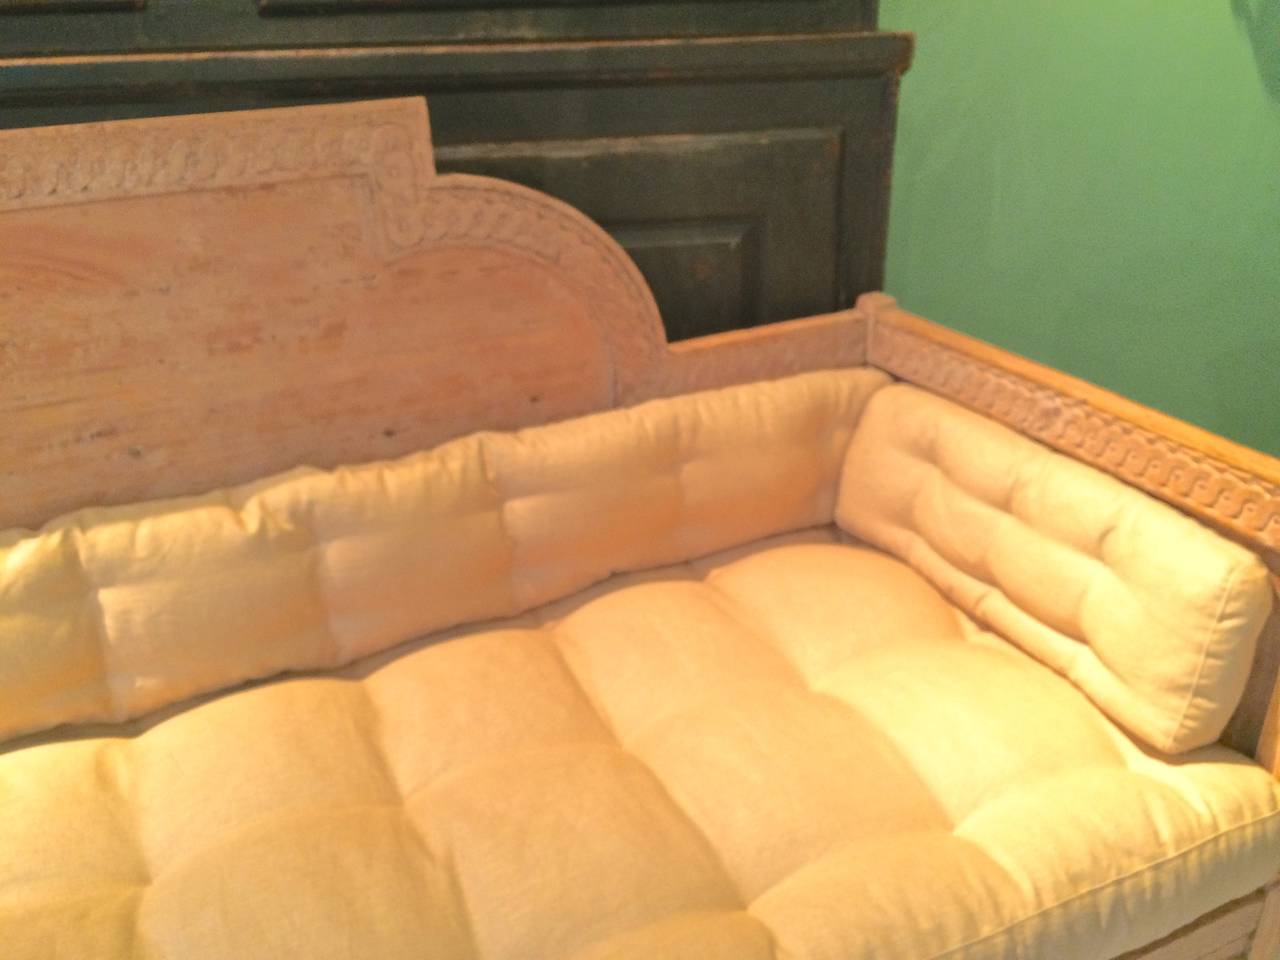 Handsome Swedish Gustavian settee in salmon paint. Beautifully carved details. Newly upholstered in Irish linen. The four corner finials have been missing for some time. Traces of flater aux bois.